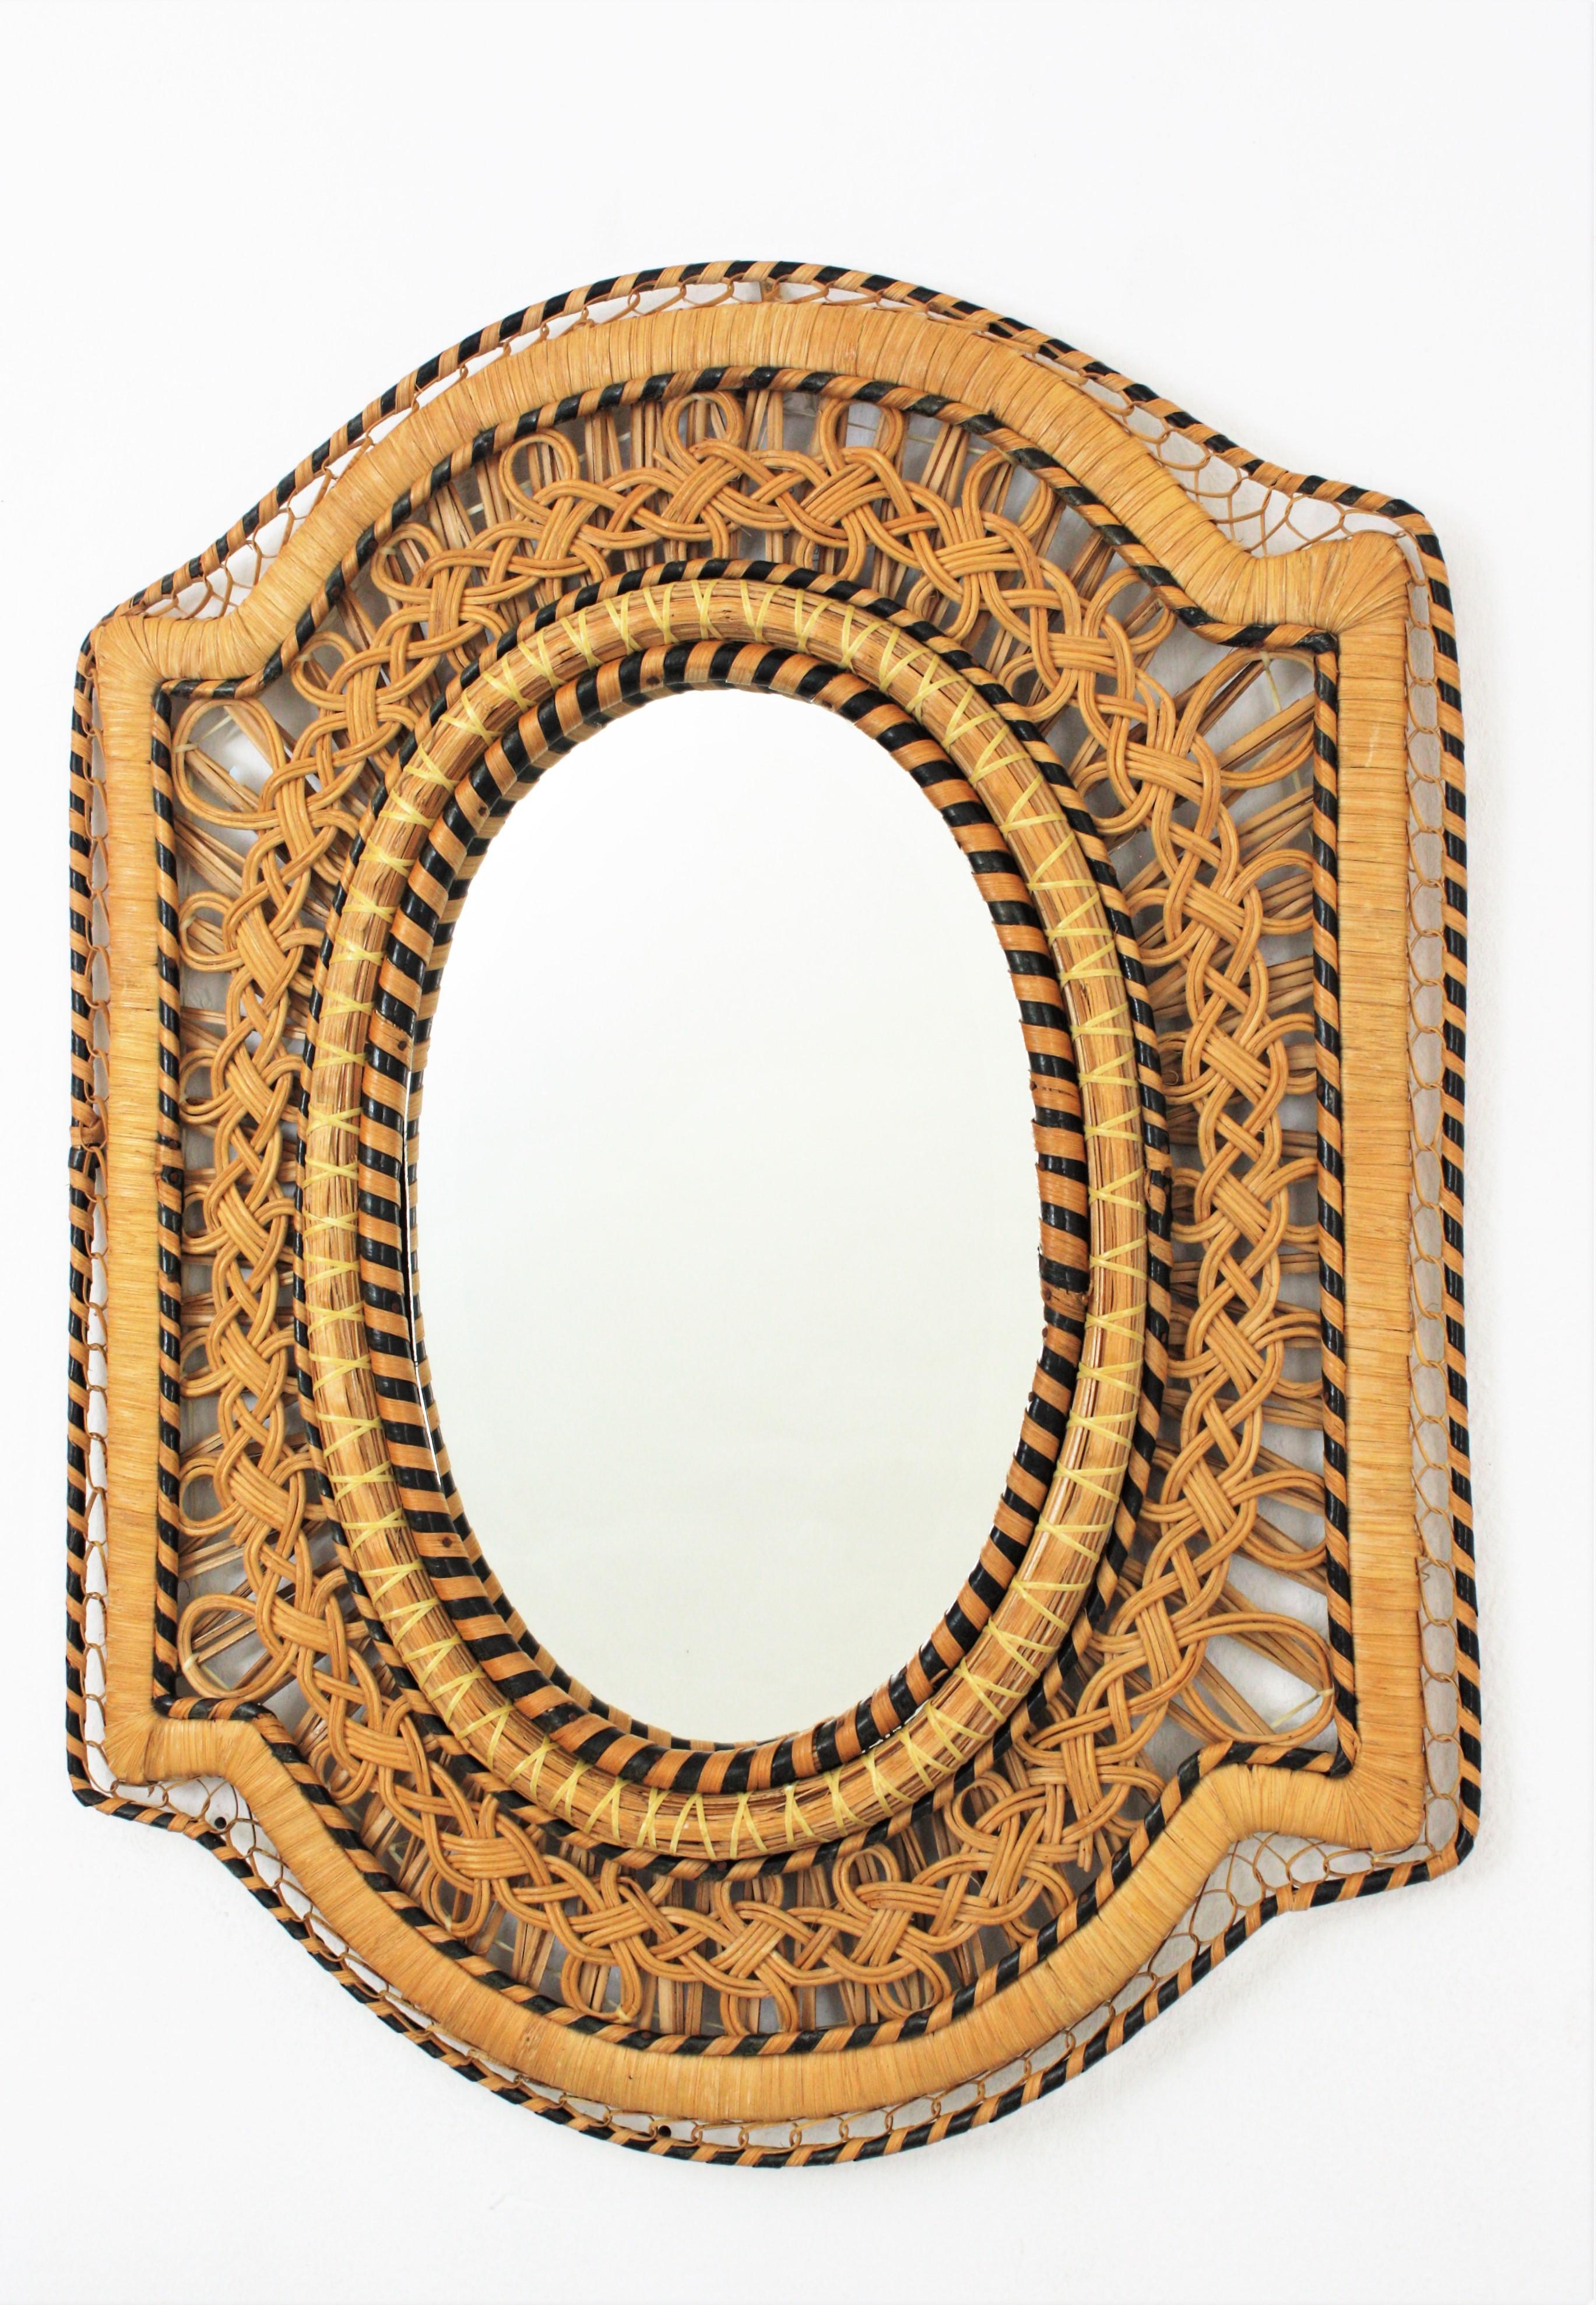 20th Century Rattan and Wicker Braided Emmanuelle Peacock Mirror, 1970s